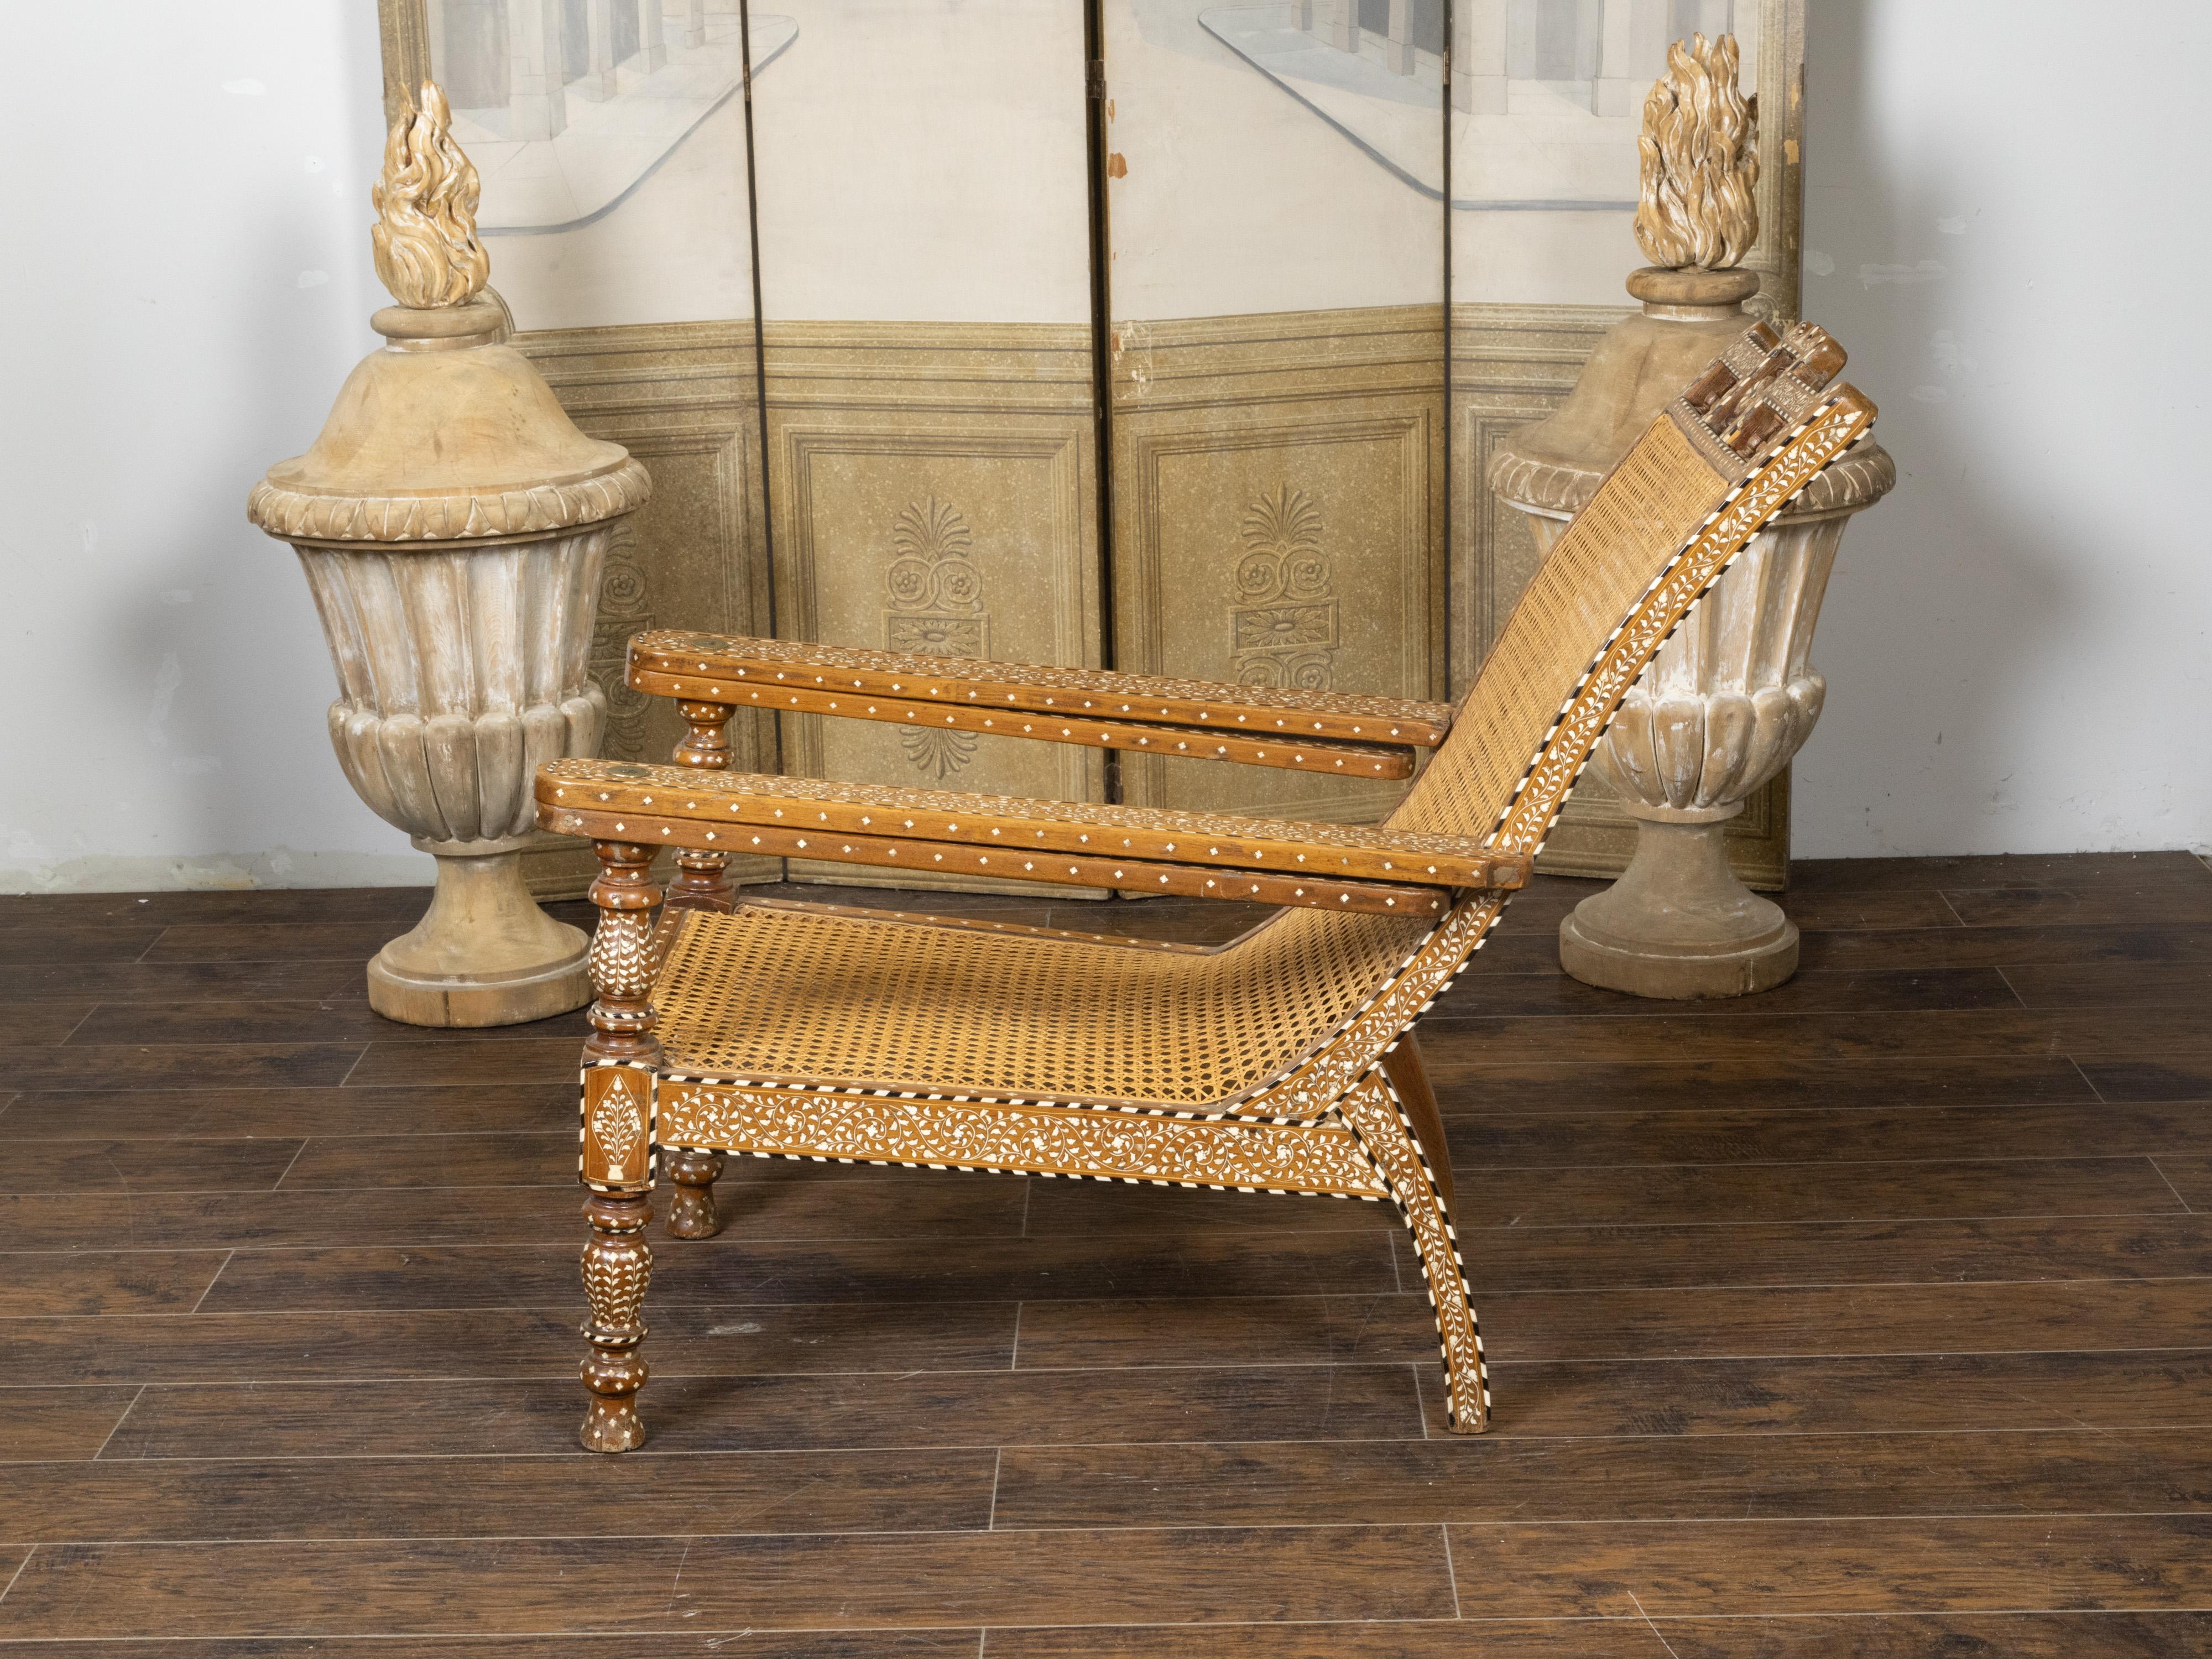 Carved Anglo-Indian Inlaid Plantation Chair with Scrolling Foliage and Extending Arms For Sale